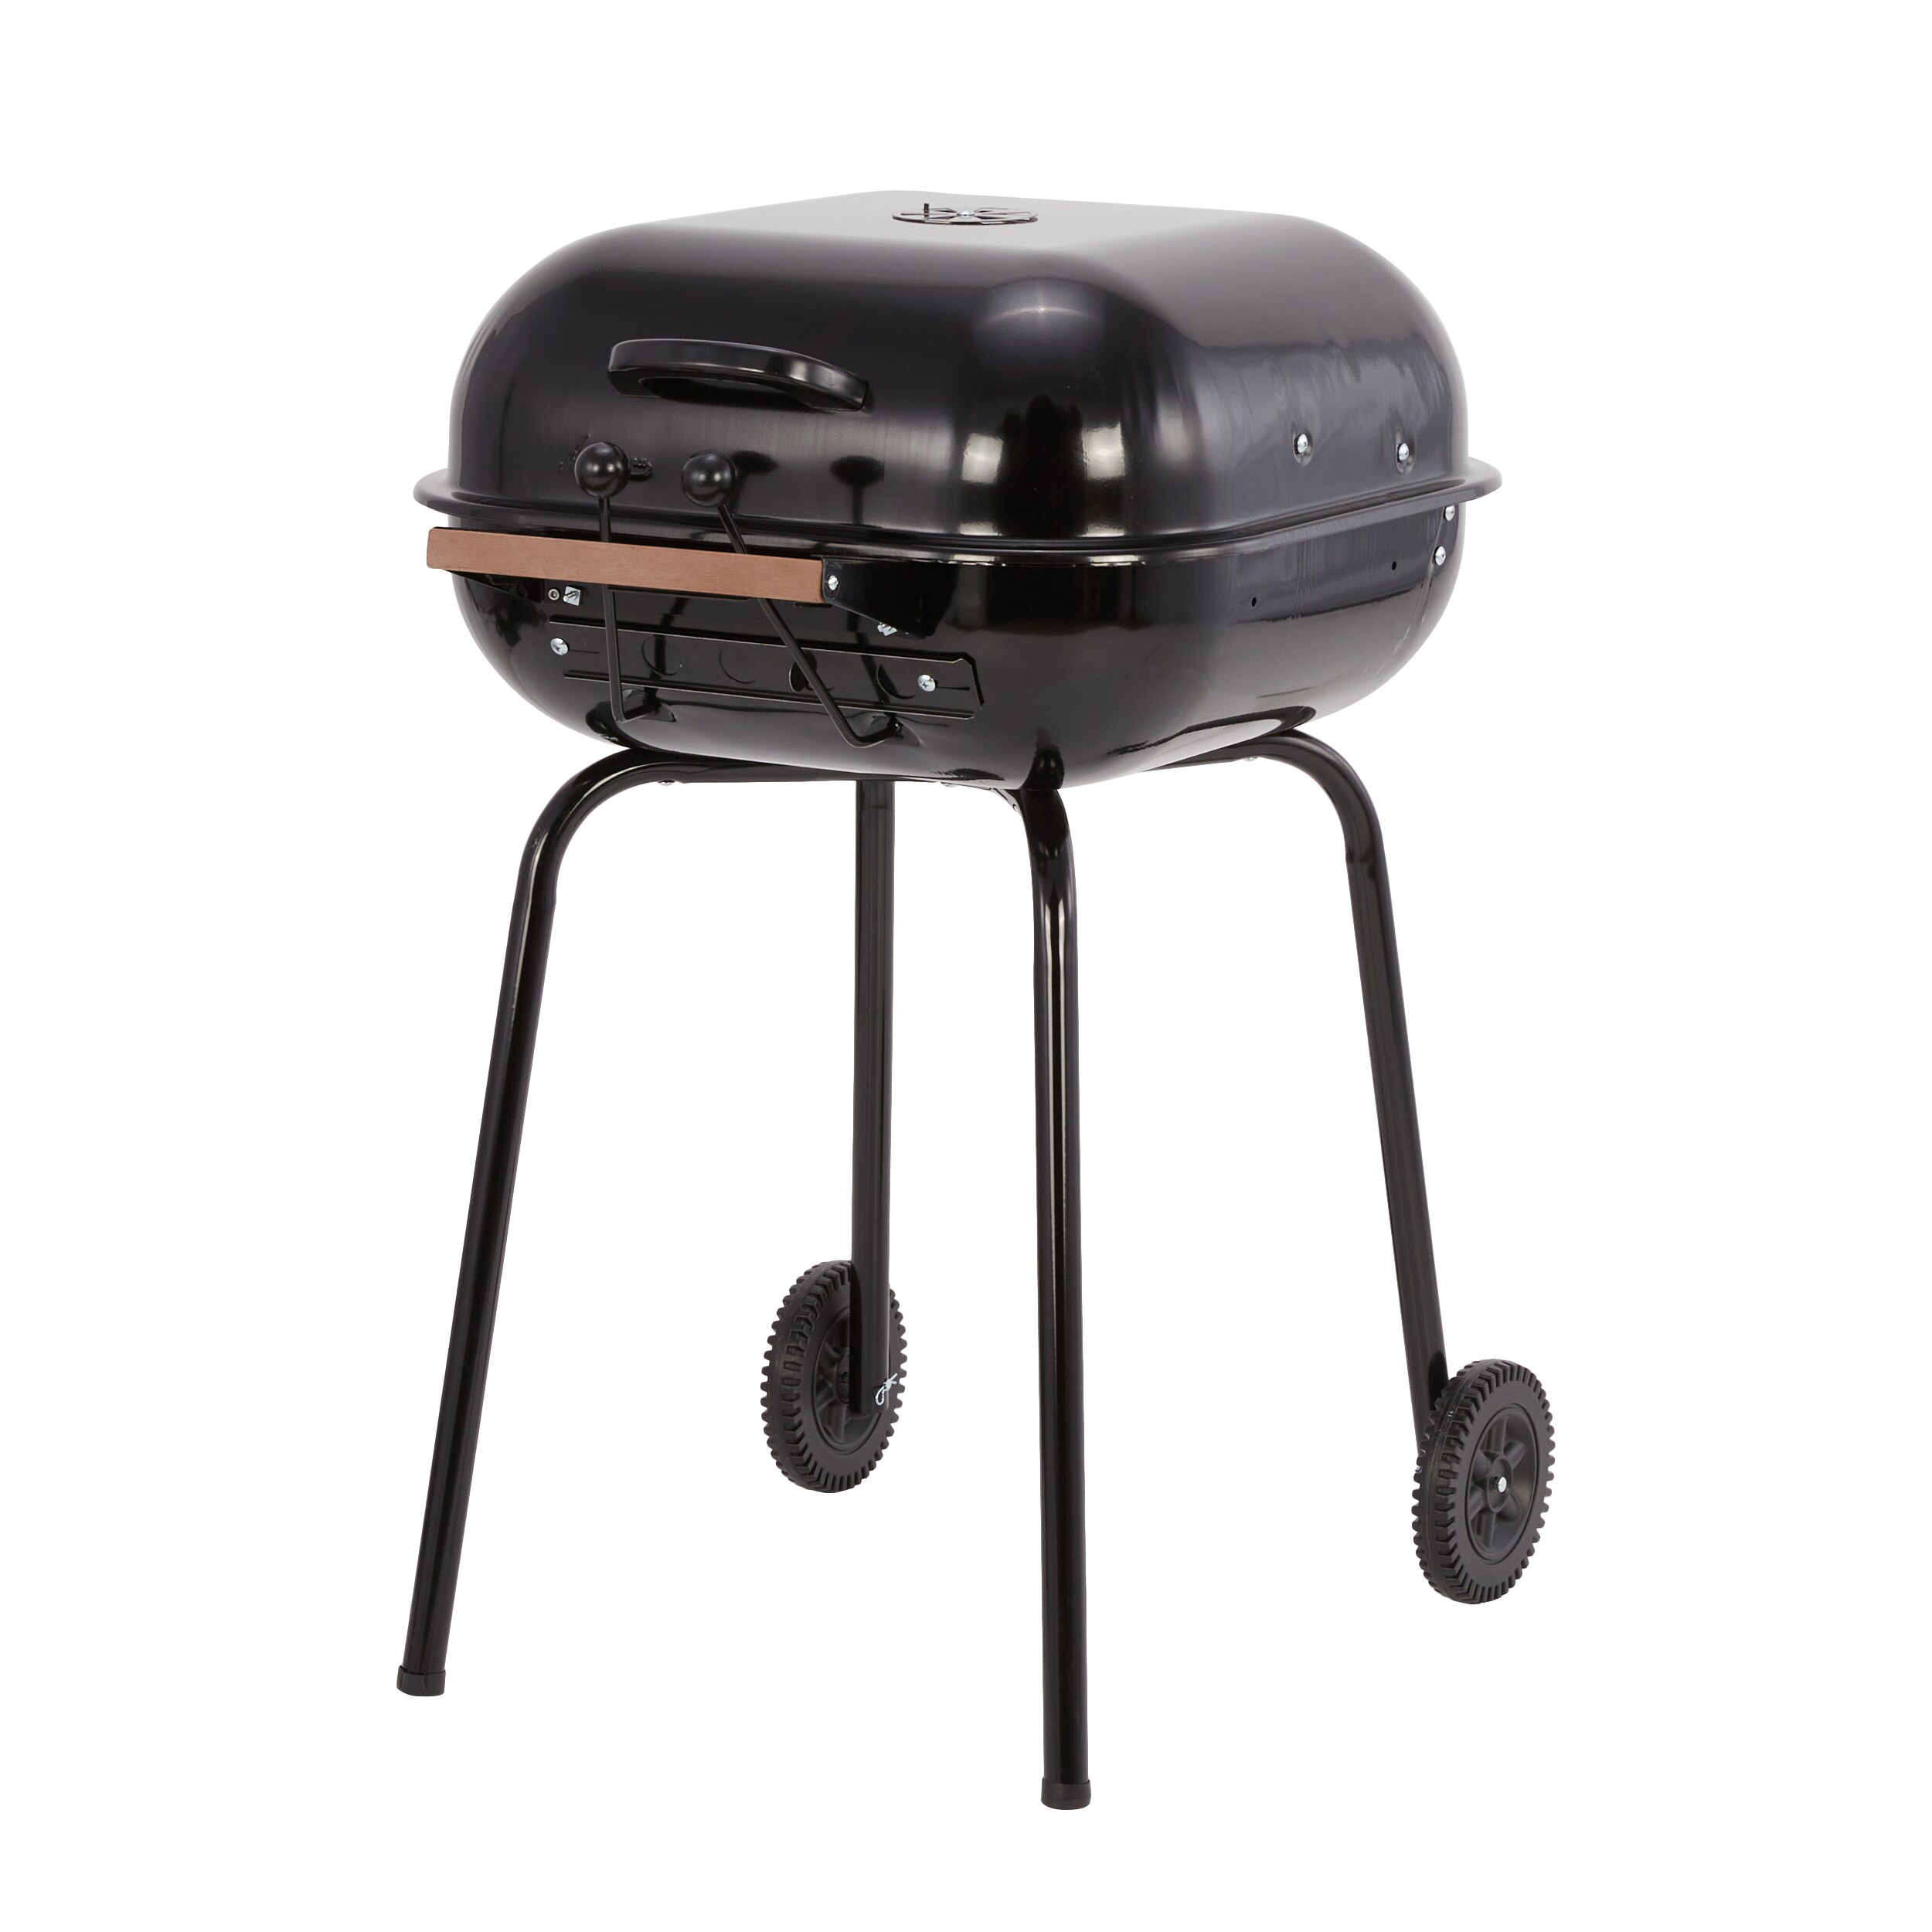 Americana Electric Cart Grill with Polymer Side Tables-Model 9350U8.181 -  Americana Grills